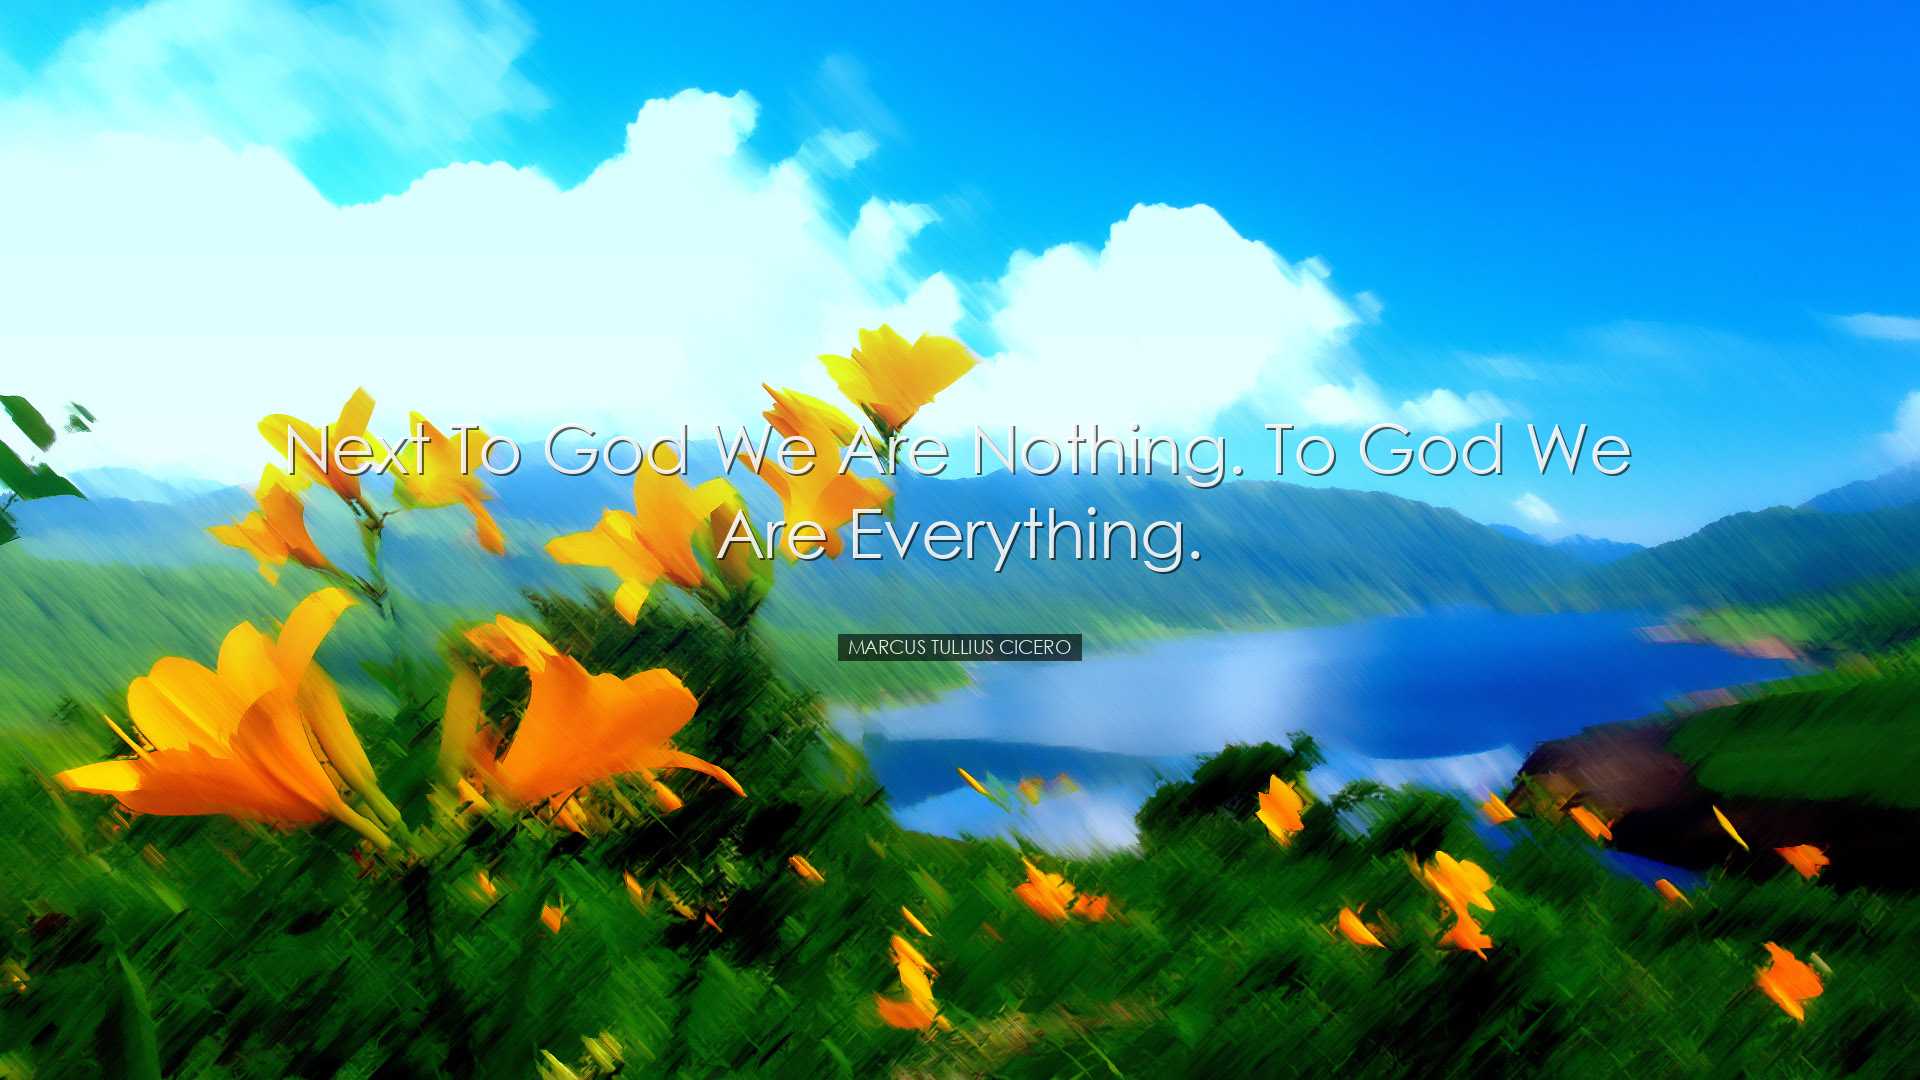 Next to God we are nothing. To God we are Everything. - Marcus Tul